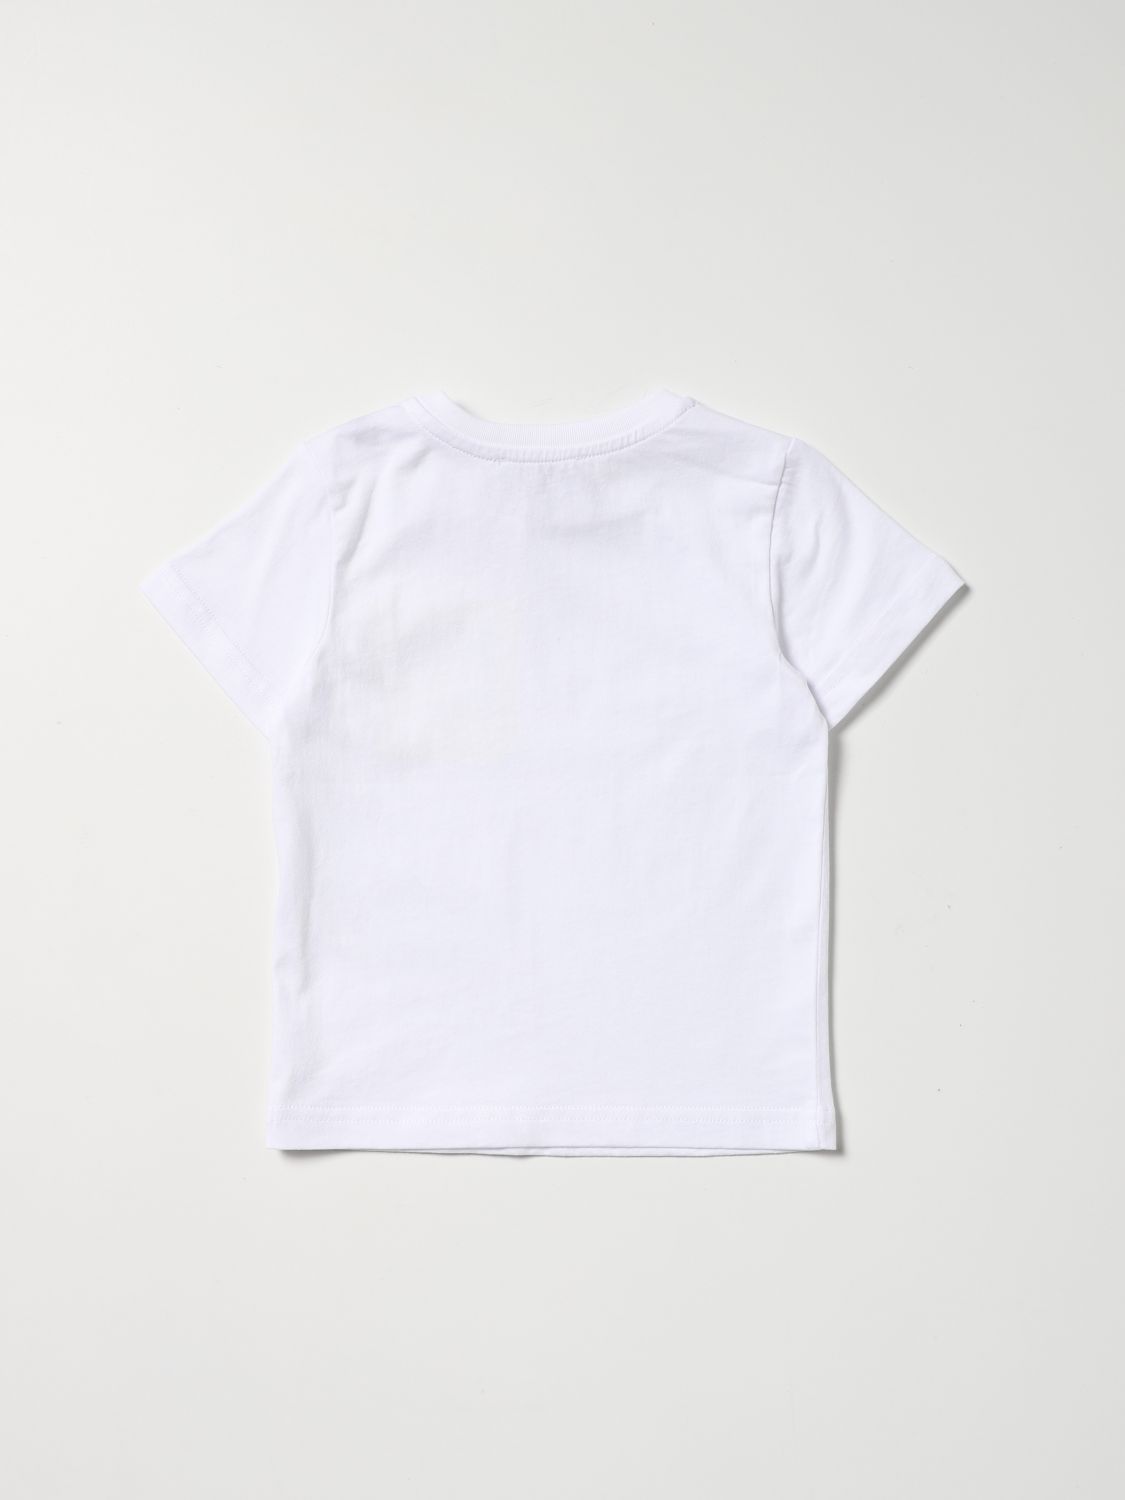 Diesel Outlet: T-shirt with patch pocket - Yellow | Diesel t-shirt ...